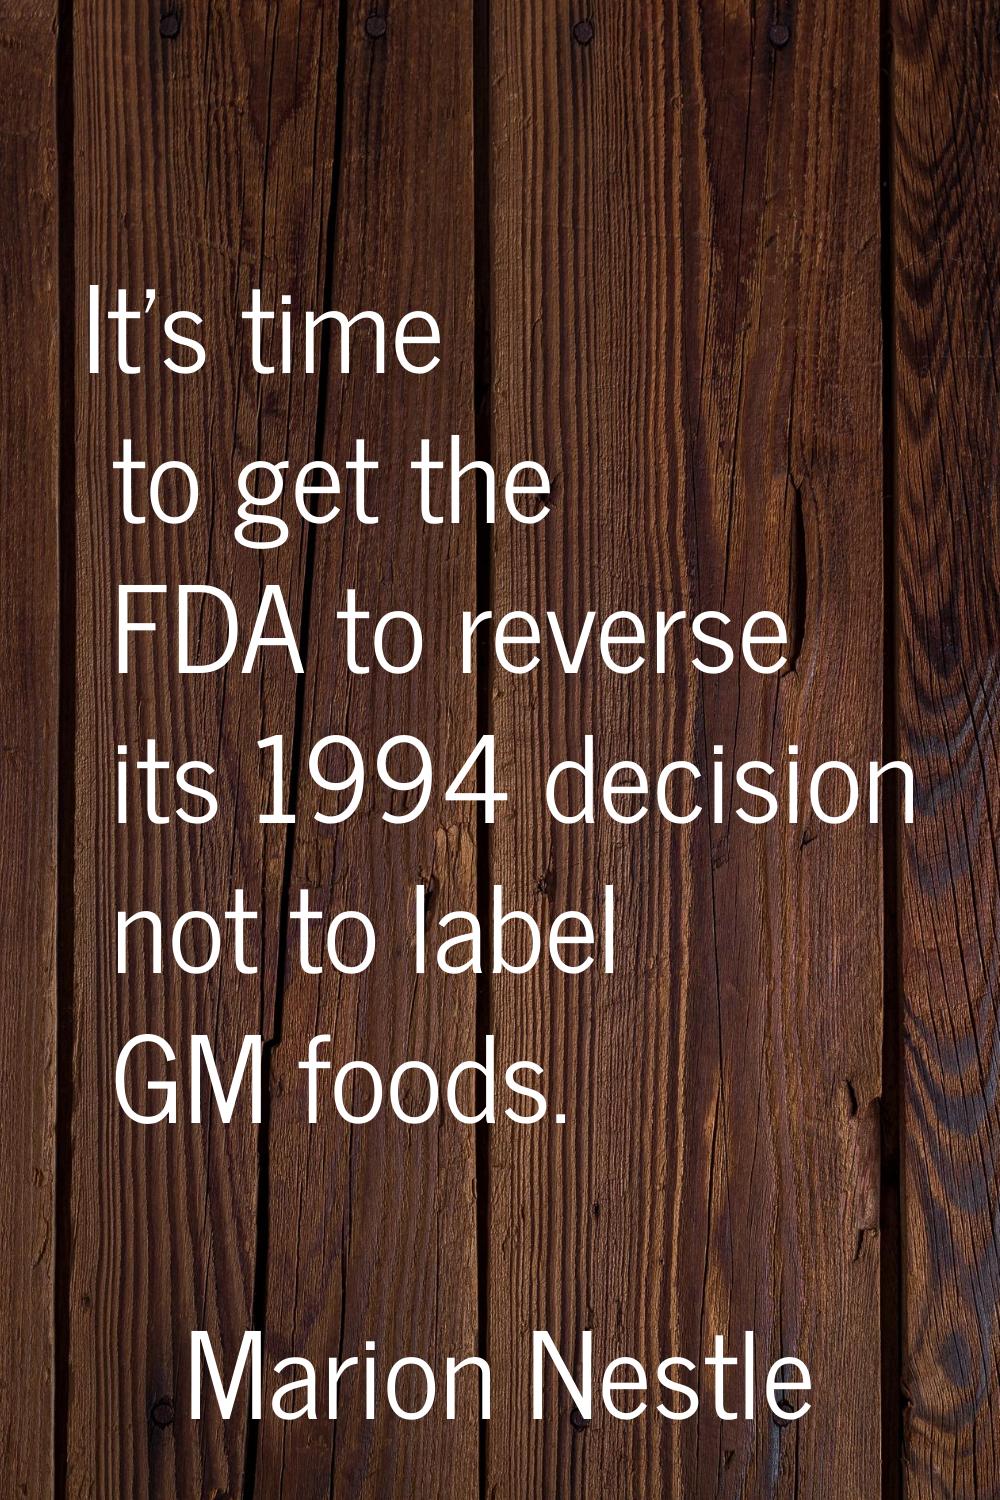 It's time to get the FDA to reverse its 1994 decision not to label GM foods.